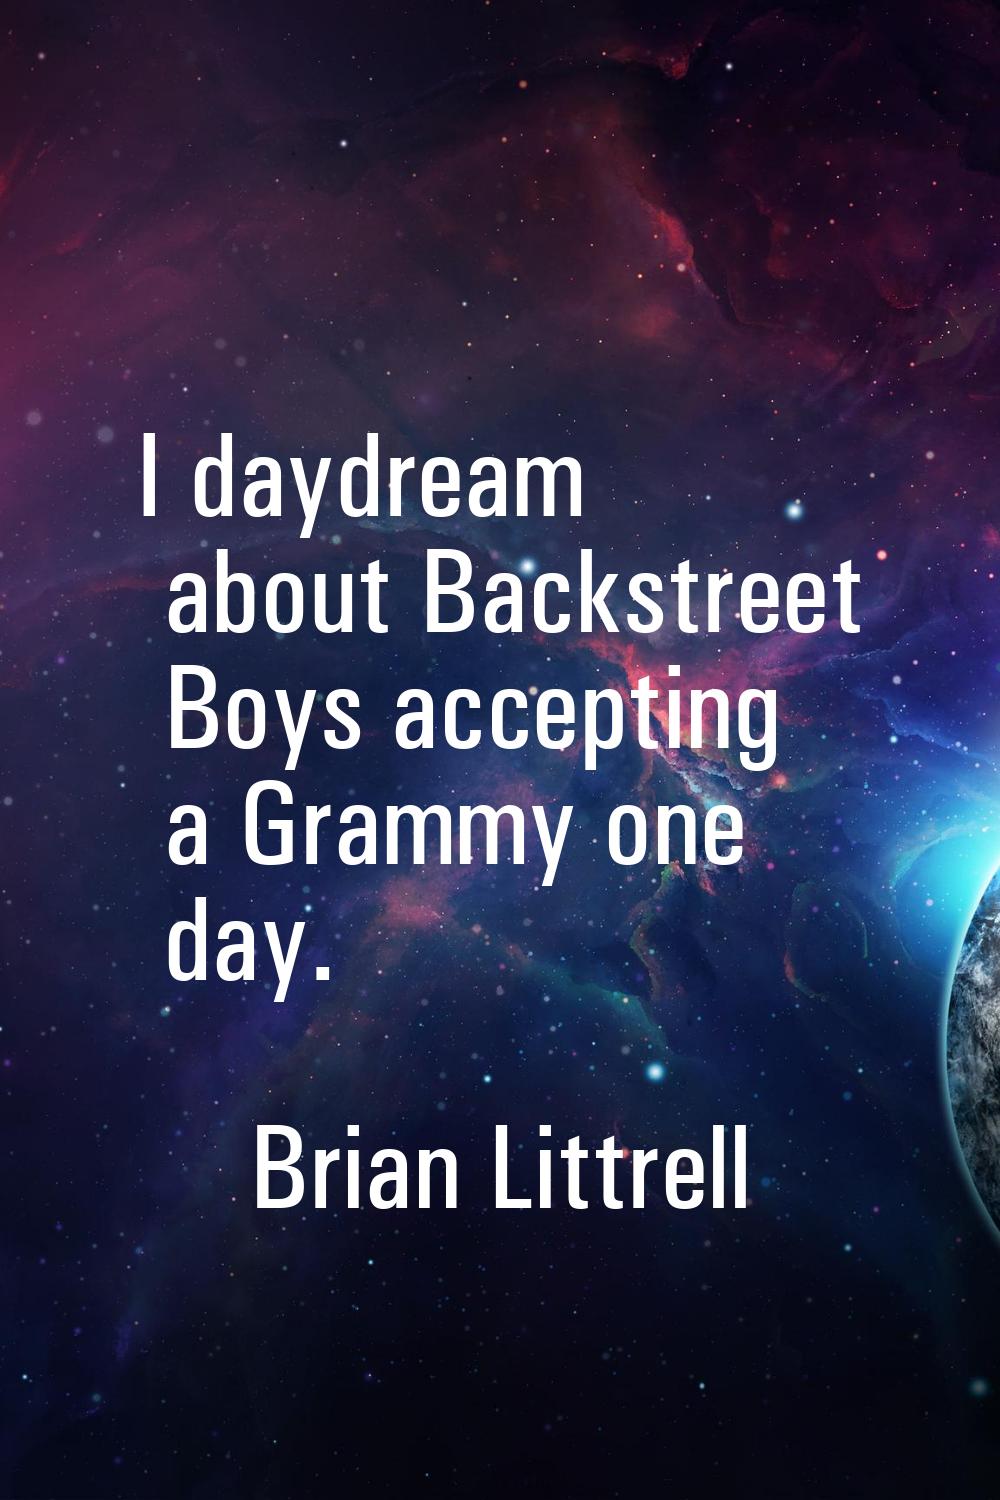 I daydream about Backstreet Boys accepting a Grammy one day.